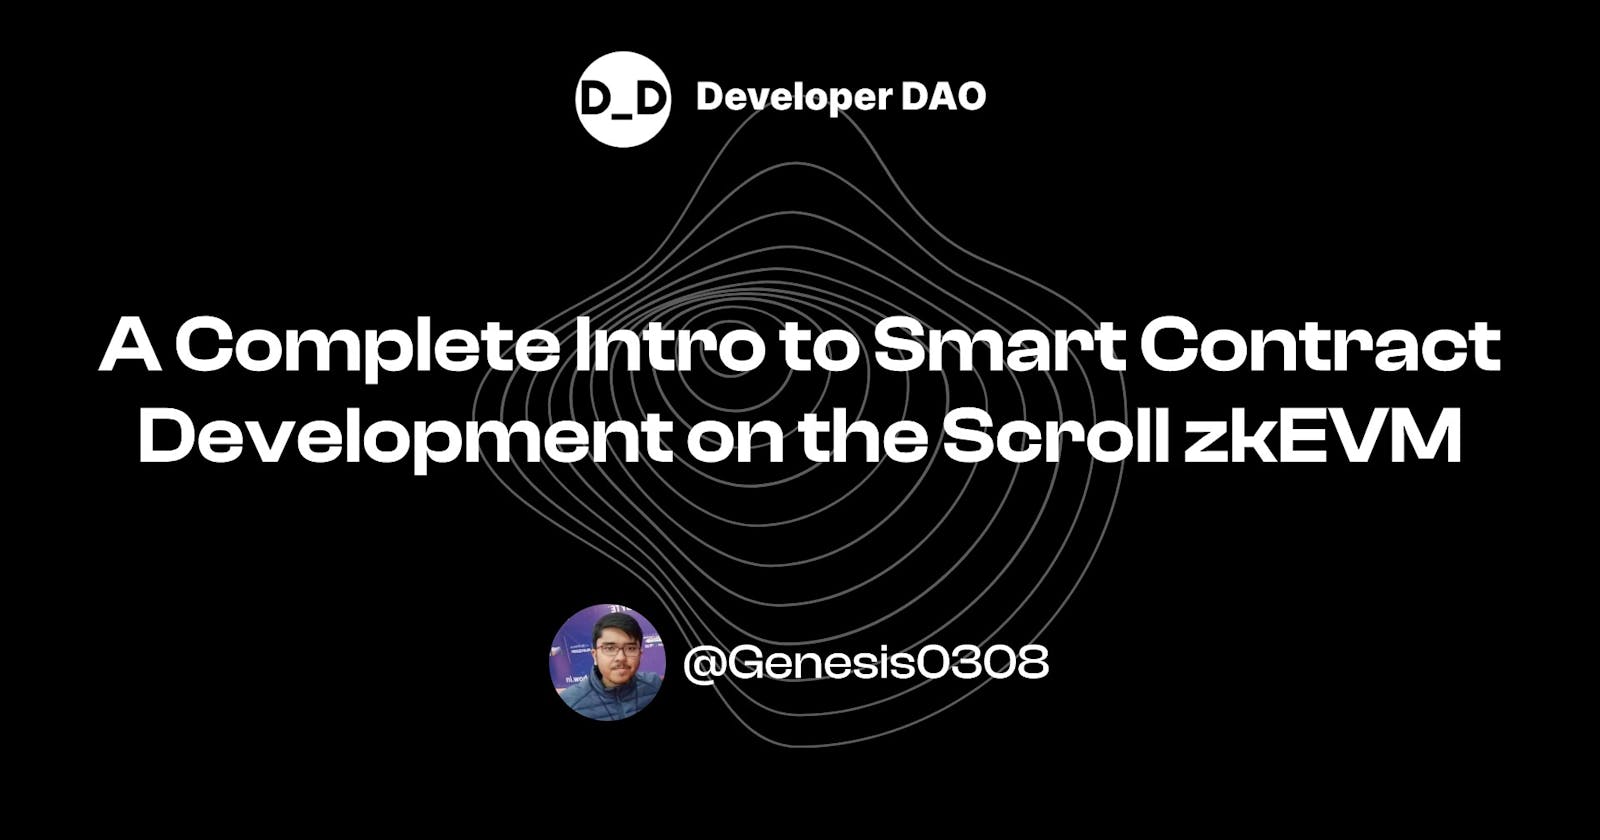 A Complete Intro to Smart Contract Development on the Scroll zkEVM